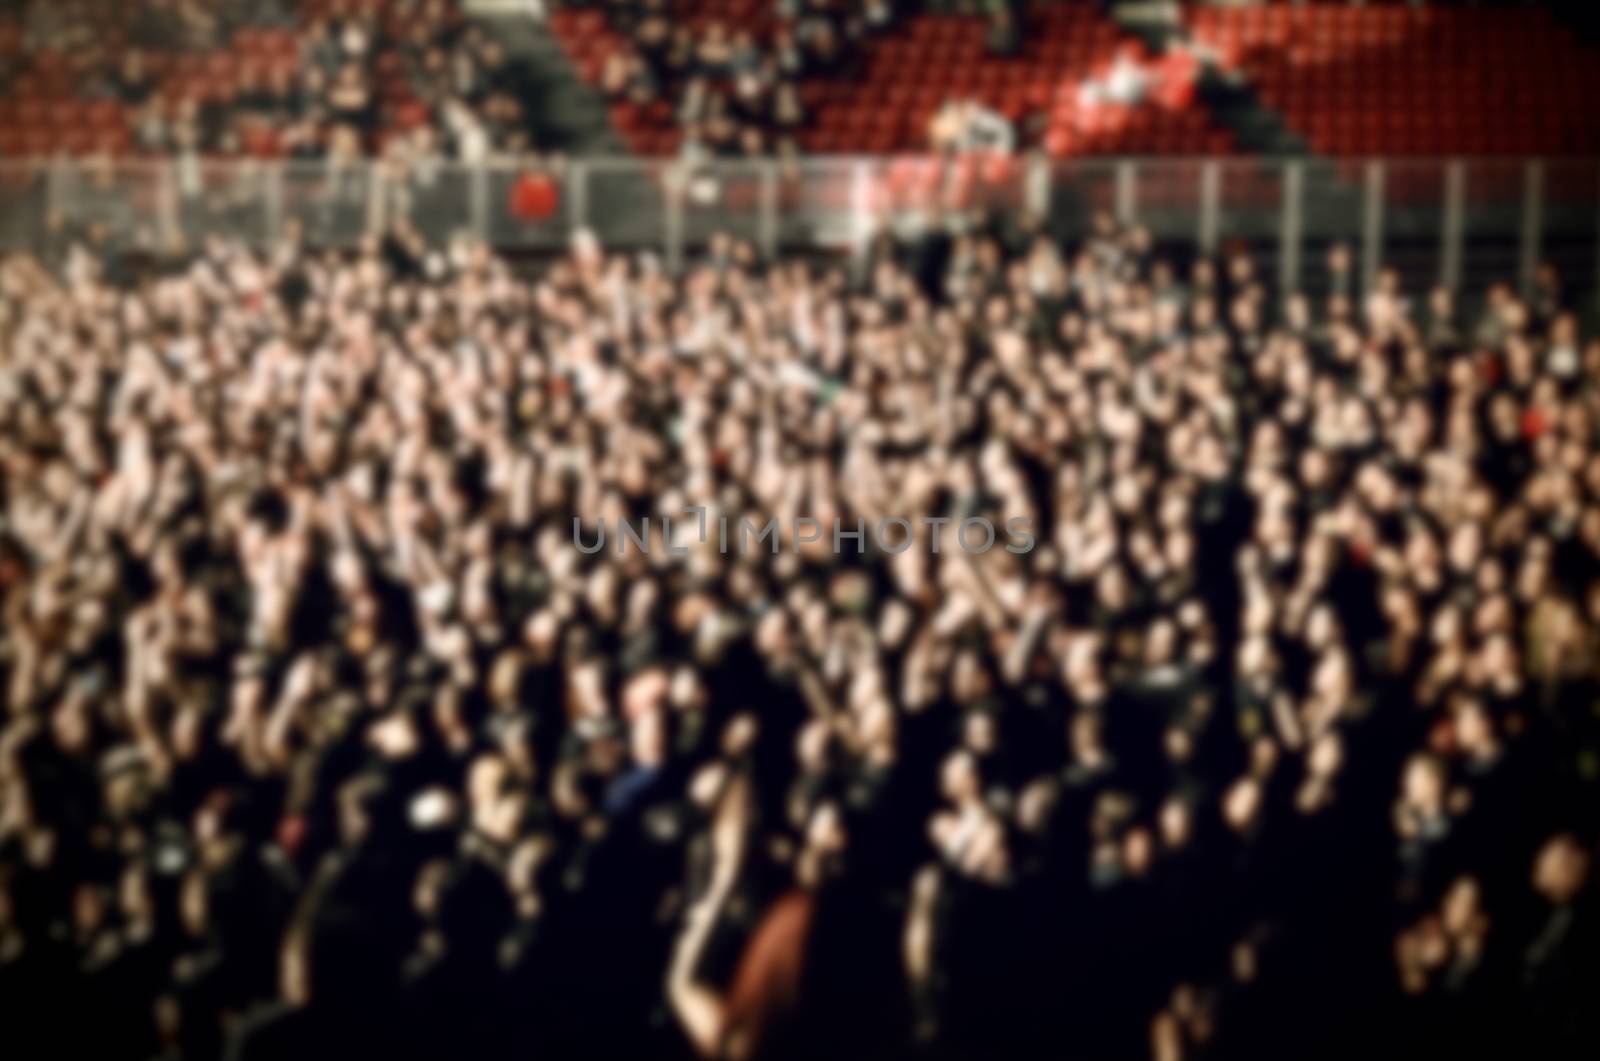 Music concert performance crowd shouting and having fun blurred background. Shot Taken 07 April 2019 in Sofia, Bulgaria